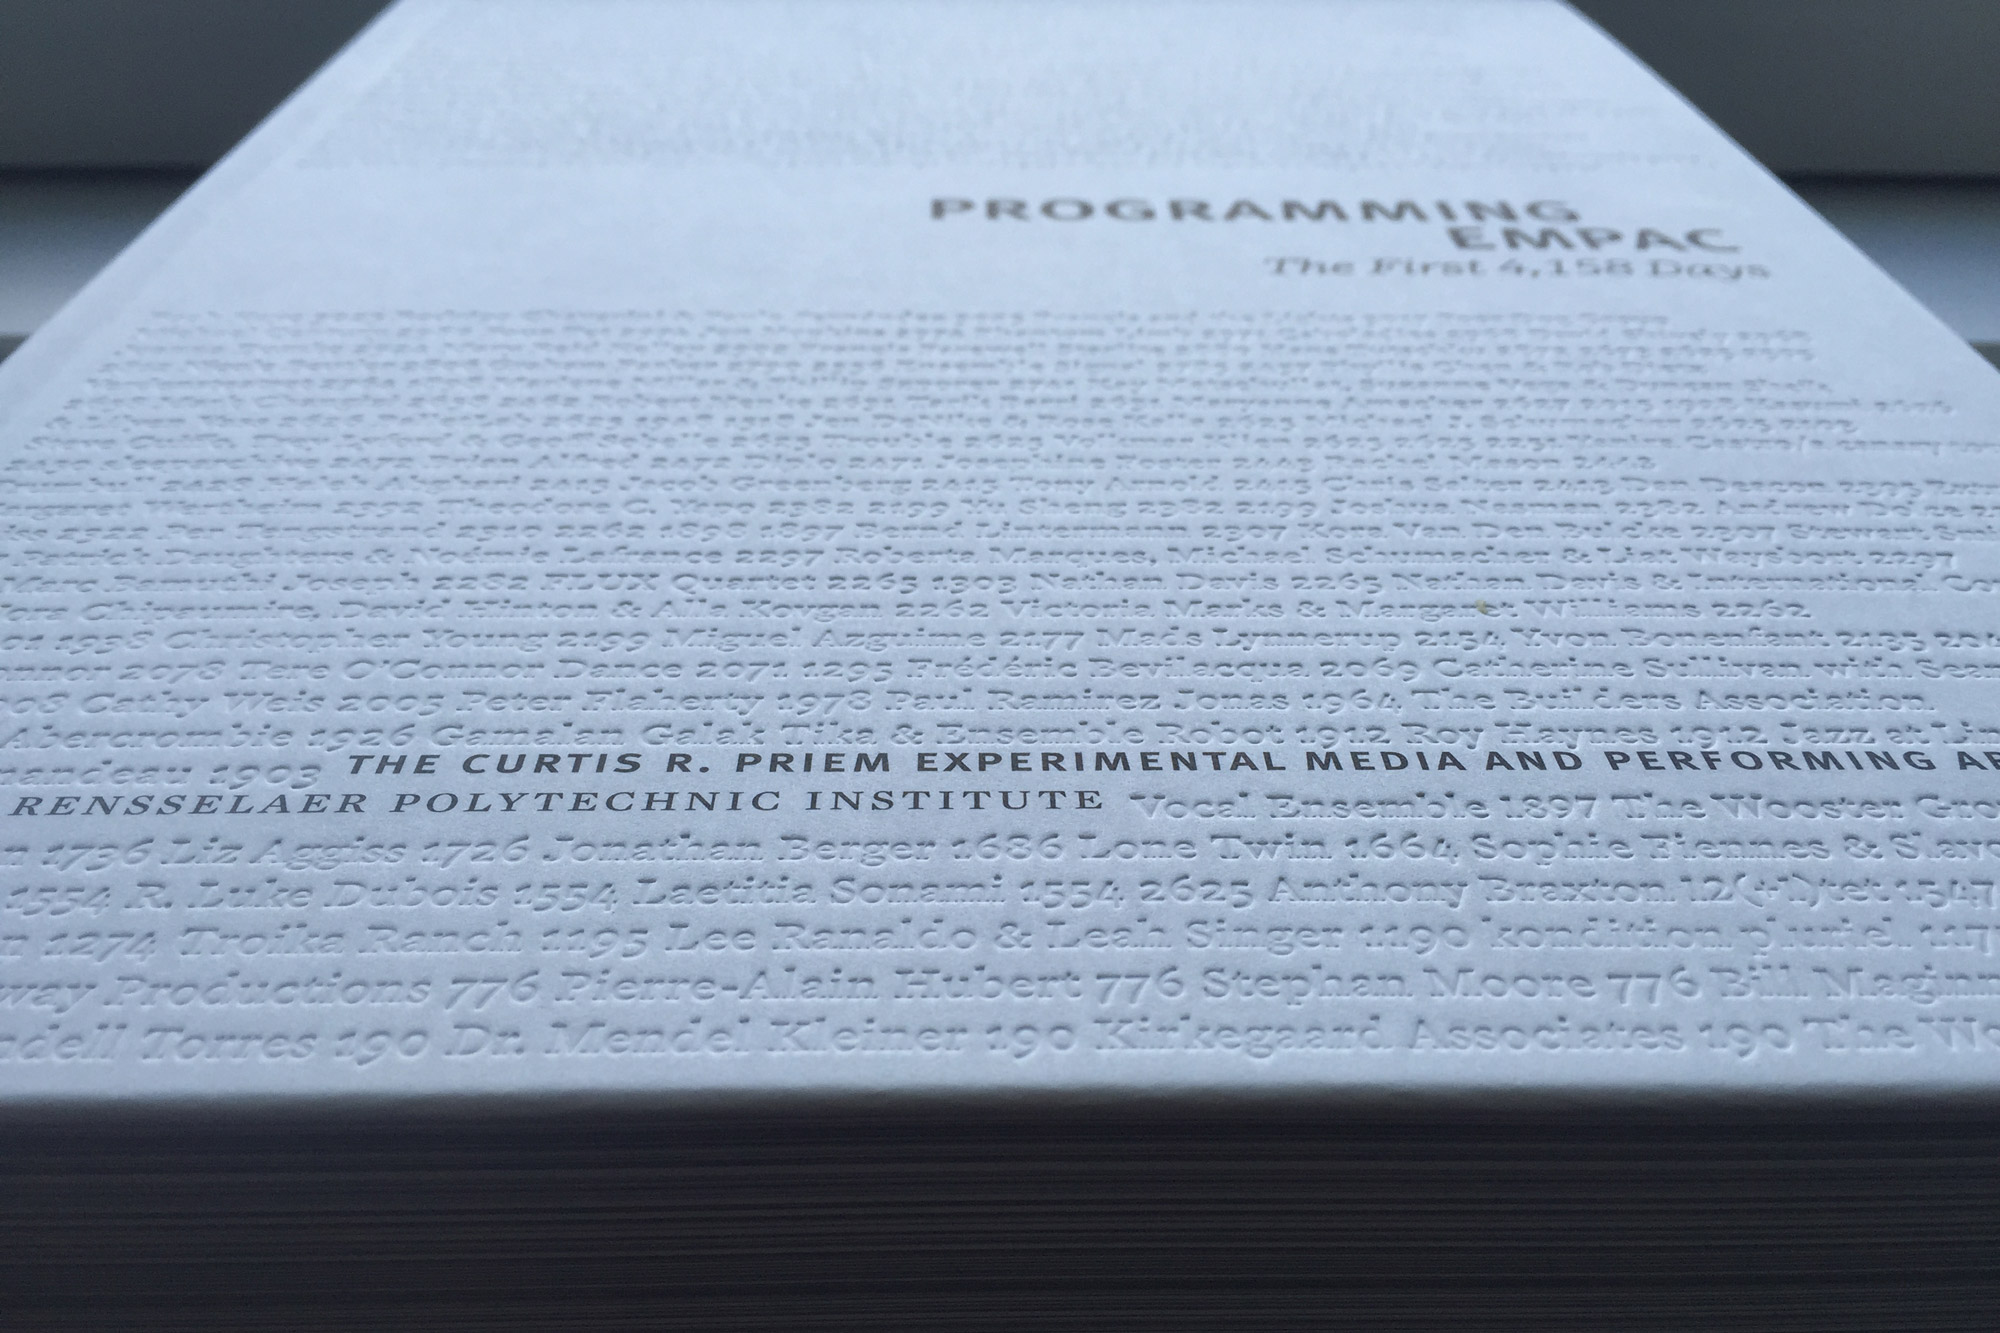 A white textured coffee table book, Programming EMPAC 